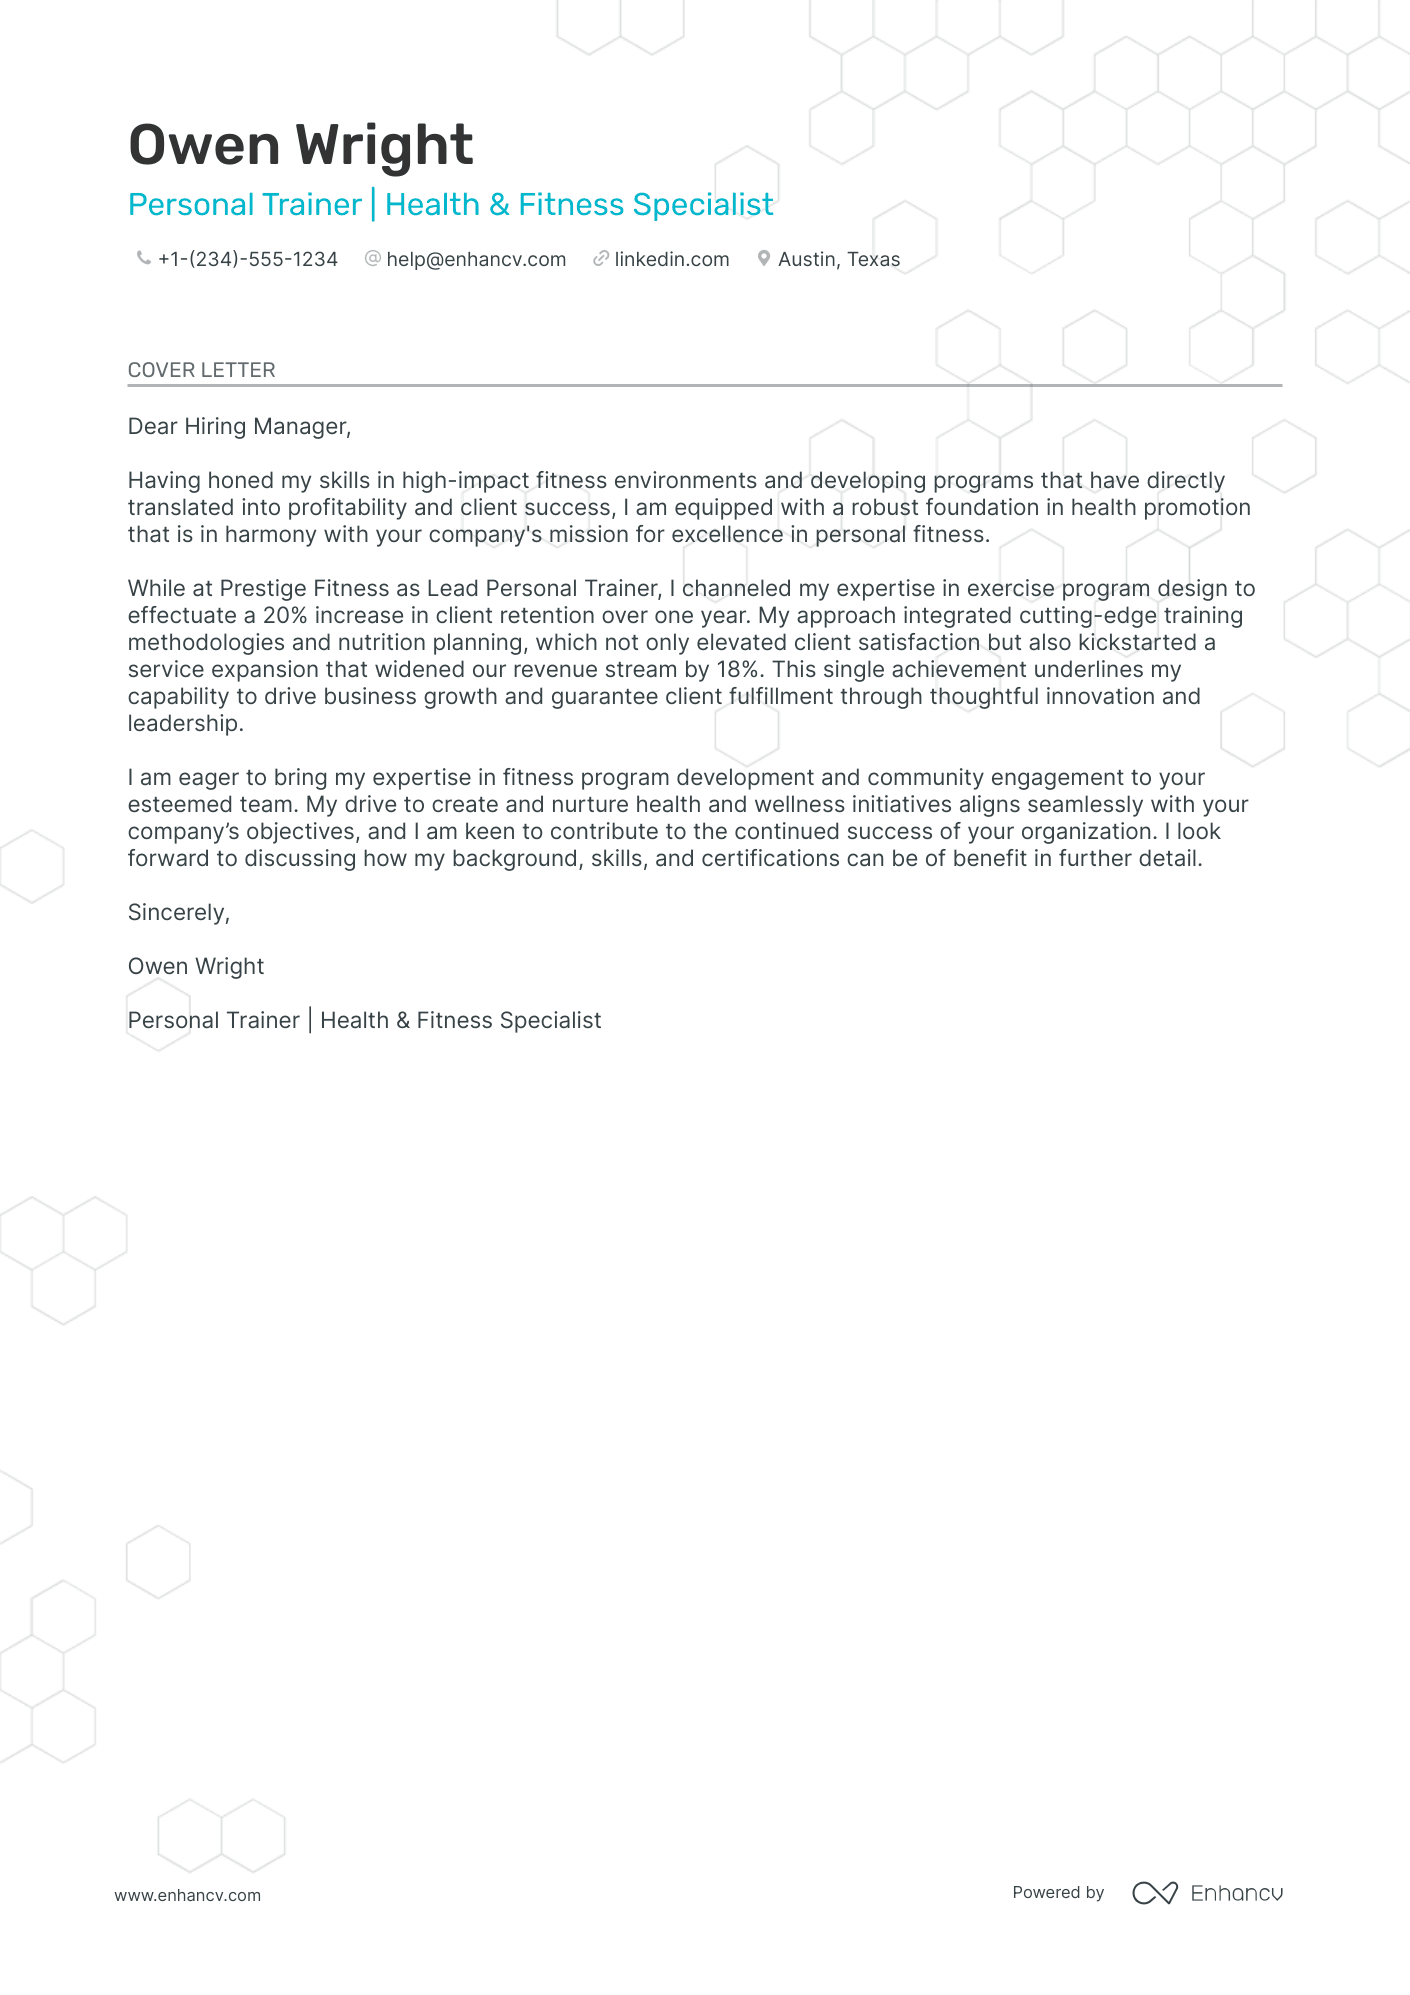 Personal Trainer cover letter